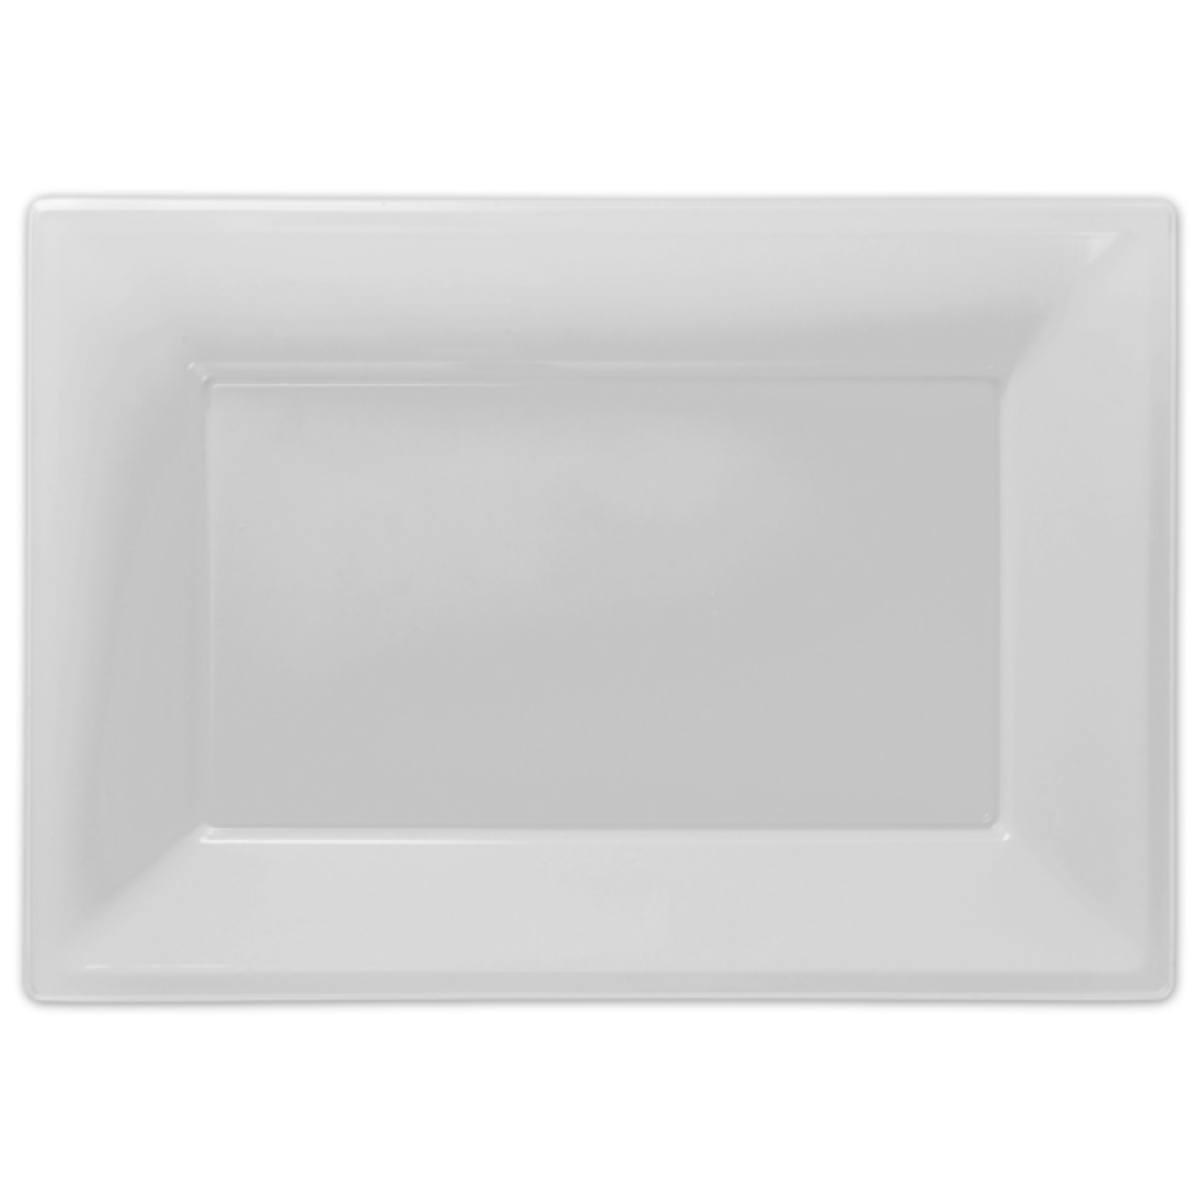 Frosty White Plastic Platters pk3 by Amscan 997427 available here at Karnival Costumes online party shop